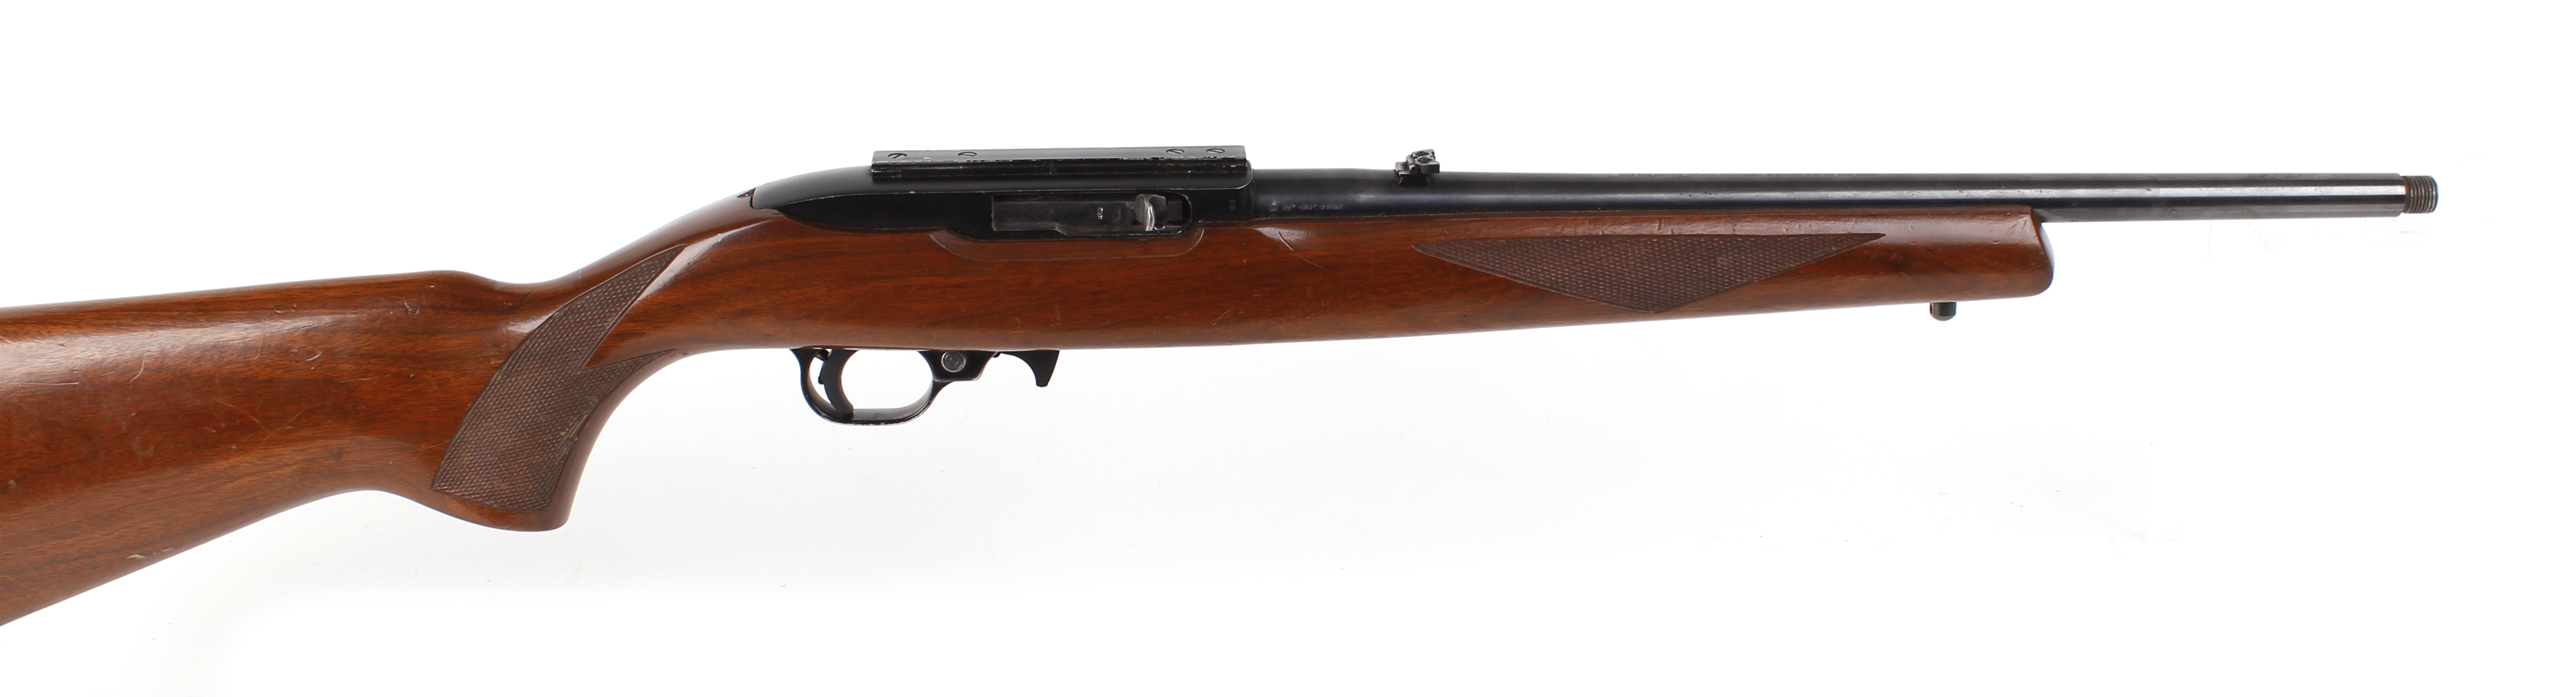 .22 Ruger Model 10/22 semi automatic rifle, 16 ins three quarter stocked carbine barrel threaded for